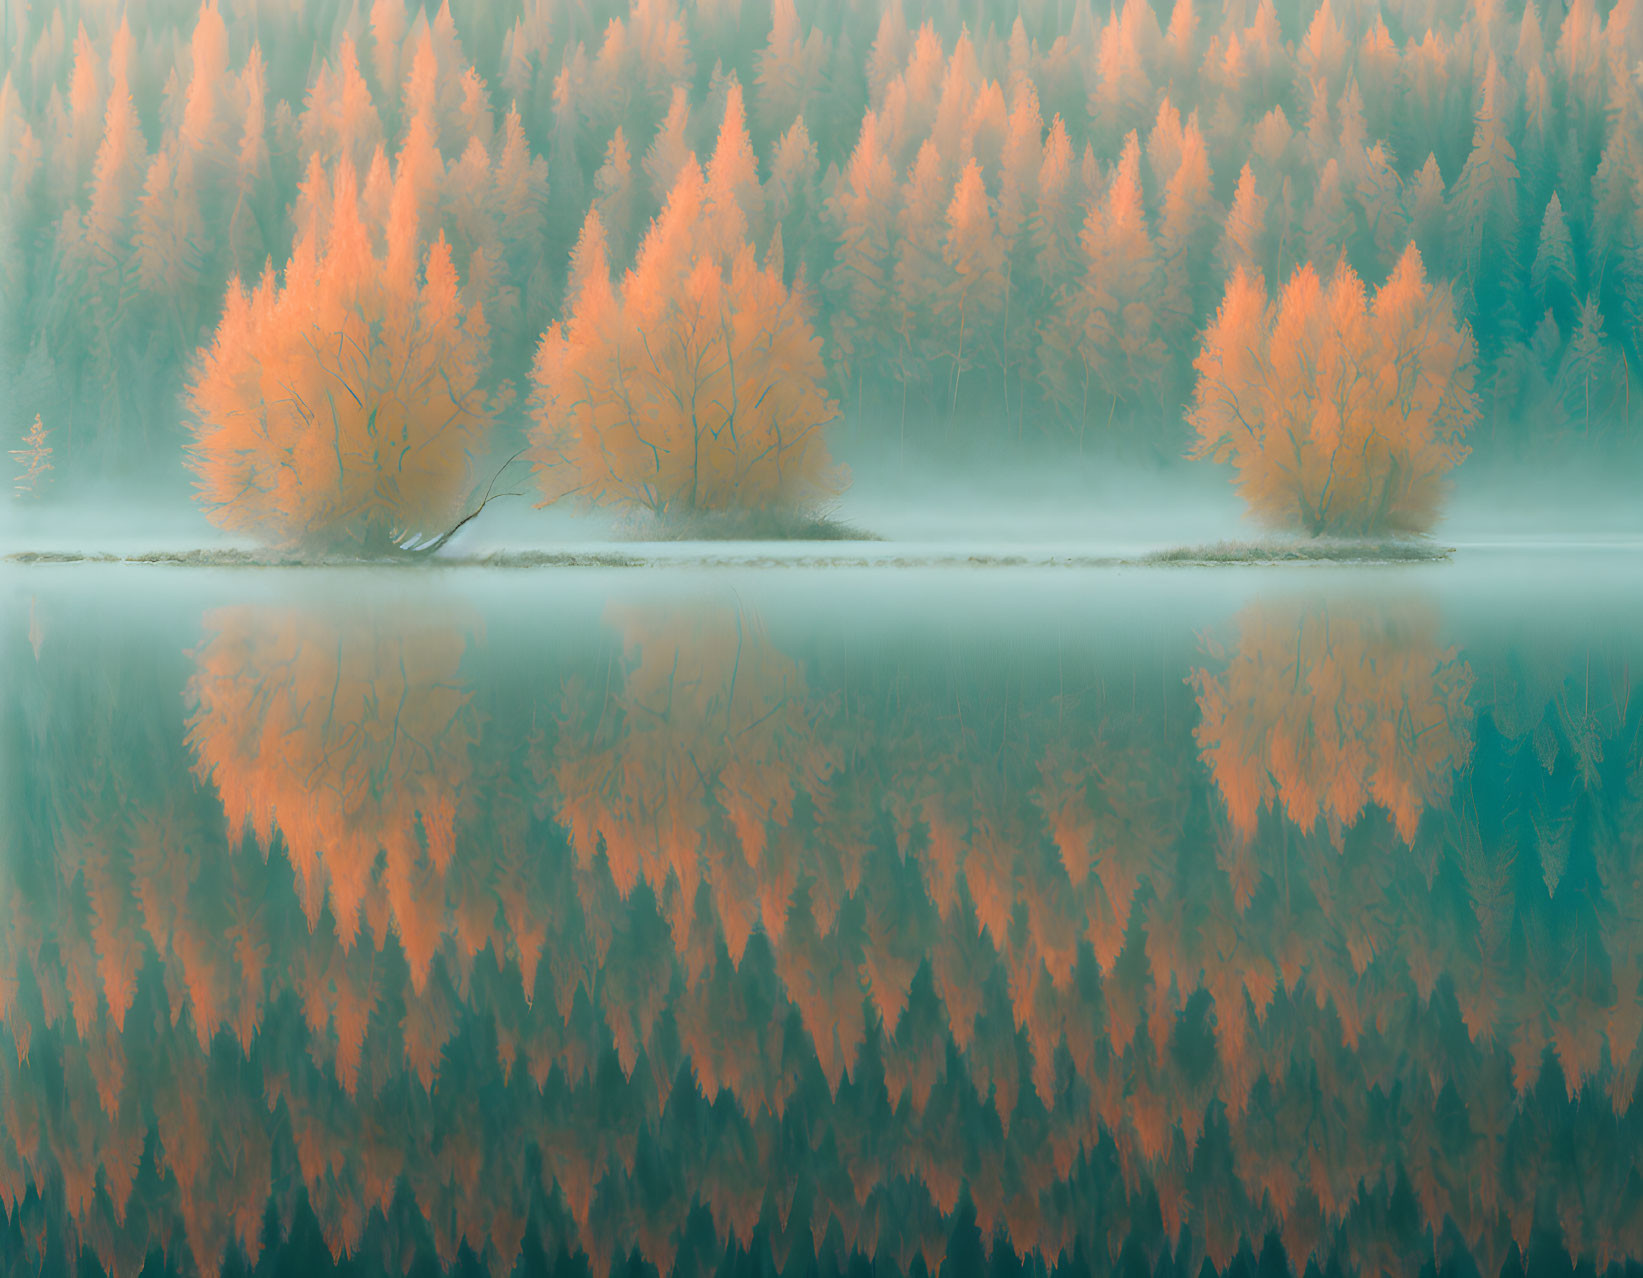 Autumnal trees reflected in misty lake with vibrant orange leaves